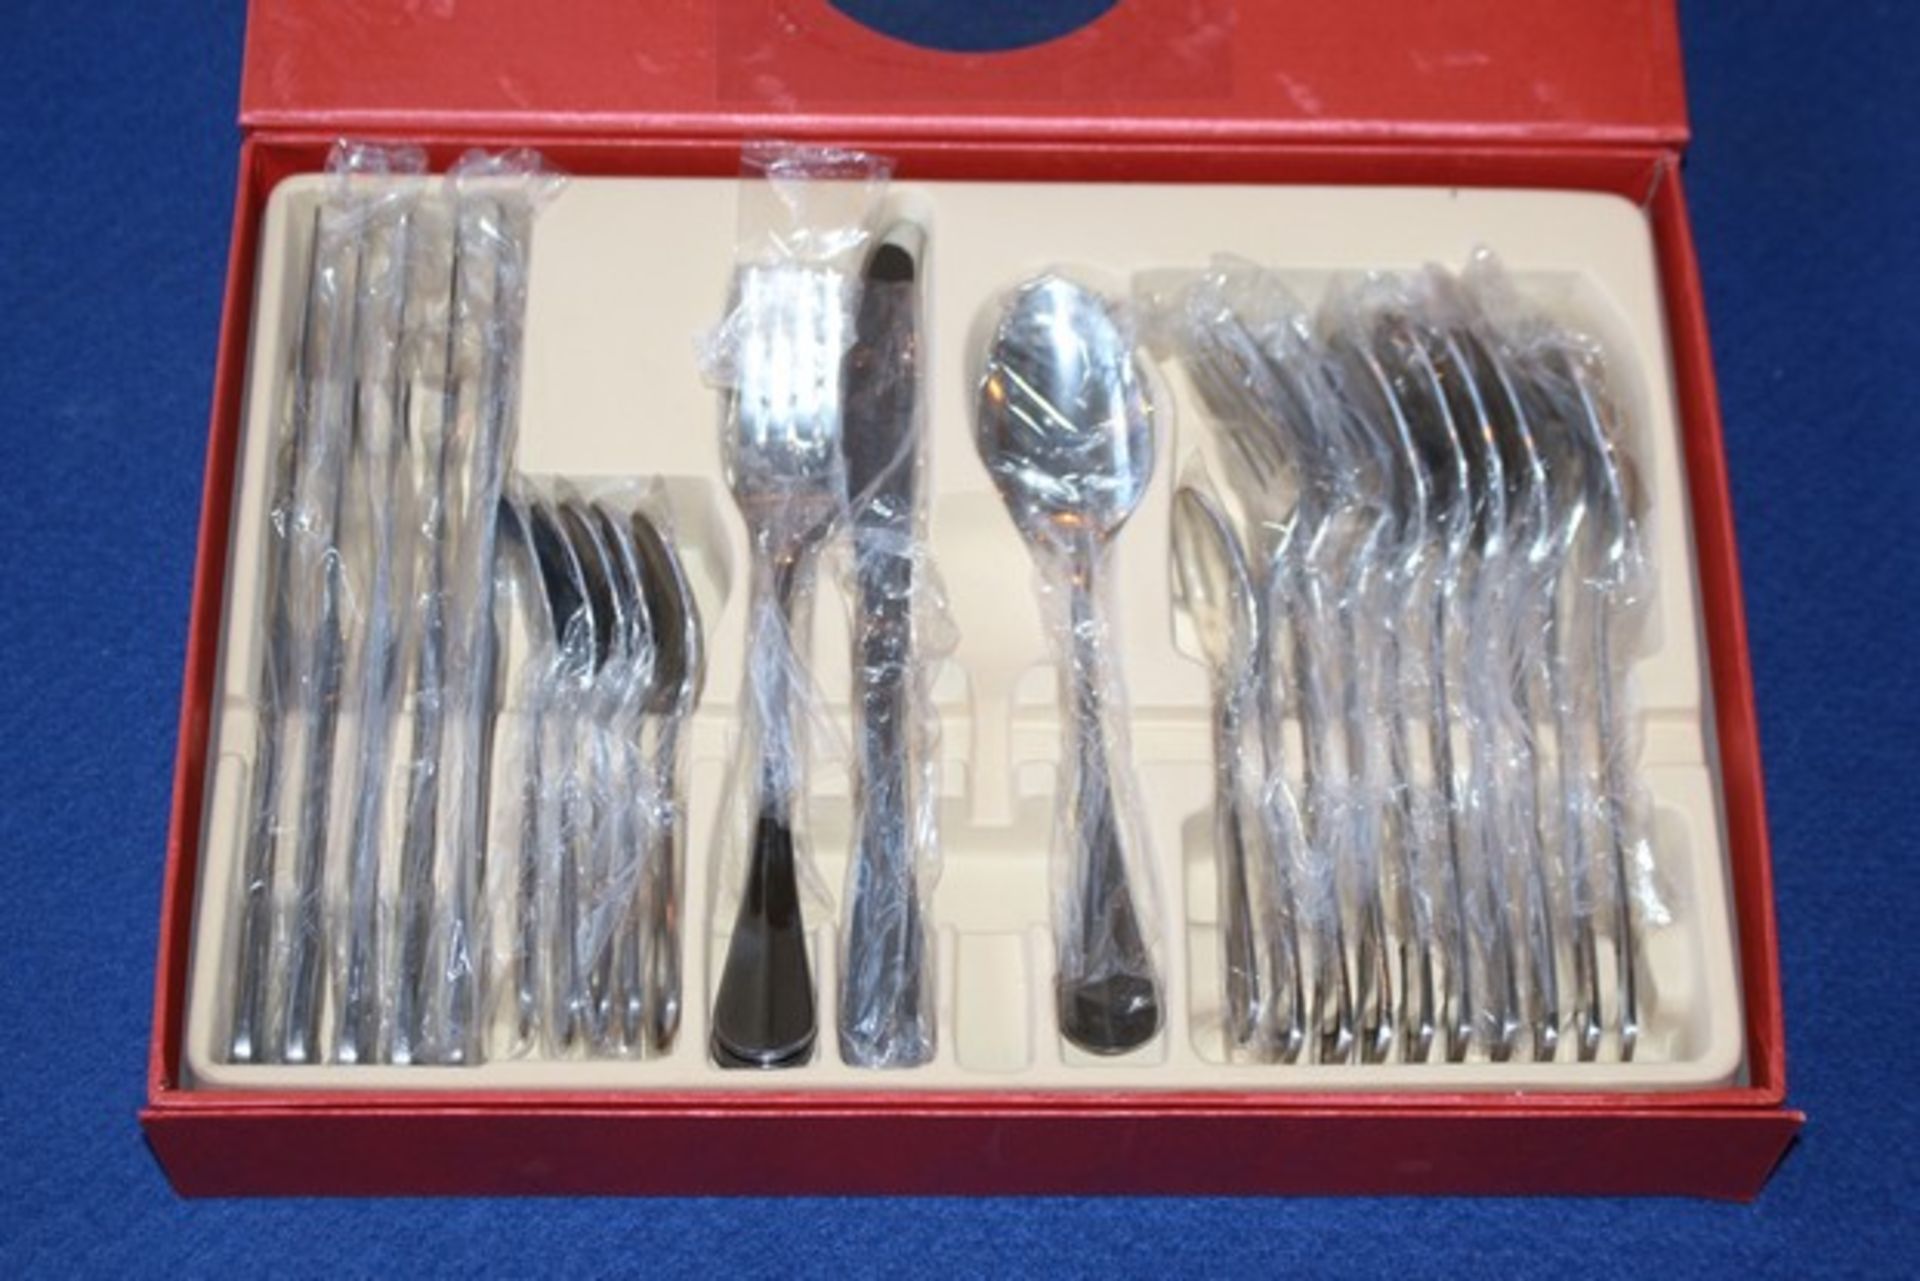 1X 12PIECE ROMAN CONRAD STAINLESS STEEL CUTLERY SET IN DISPLAY BOX RRP £106